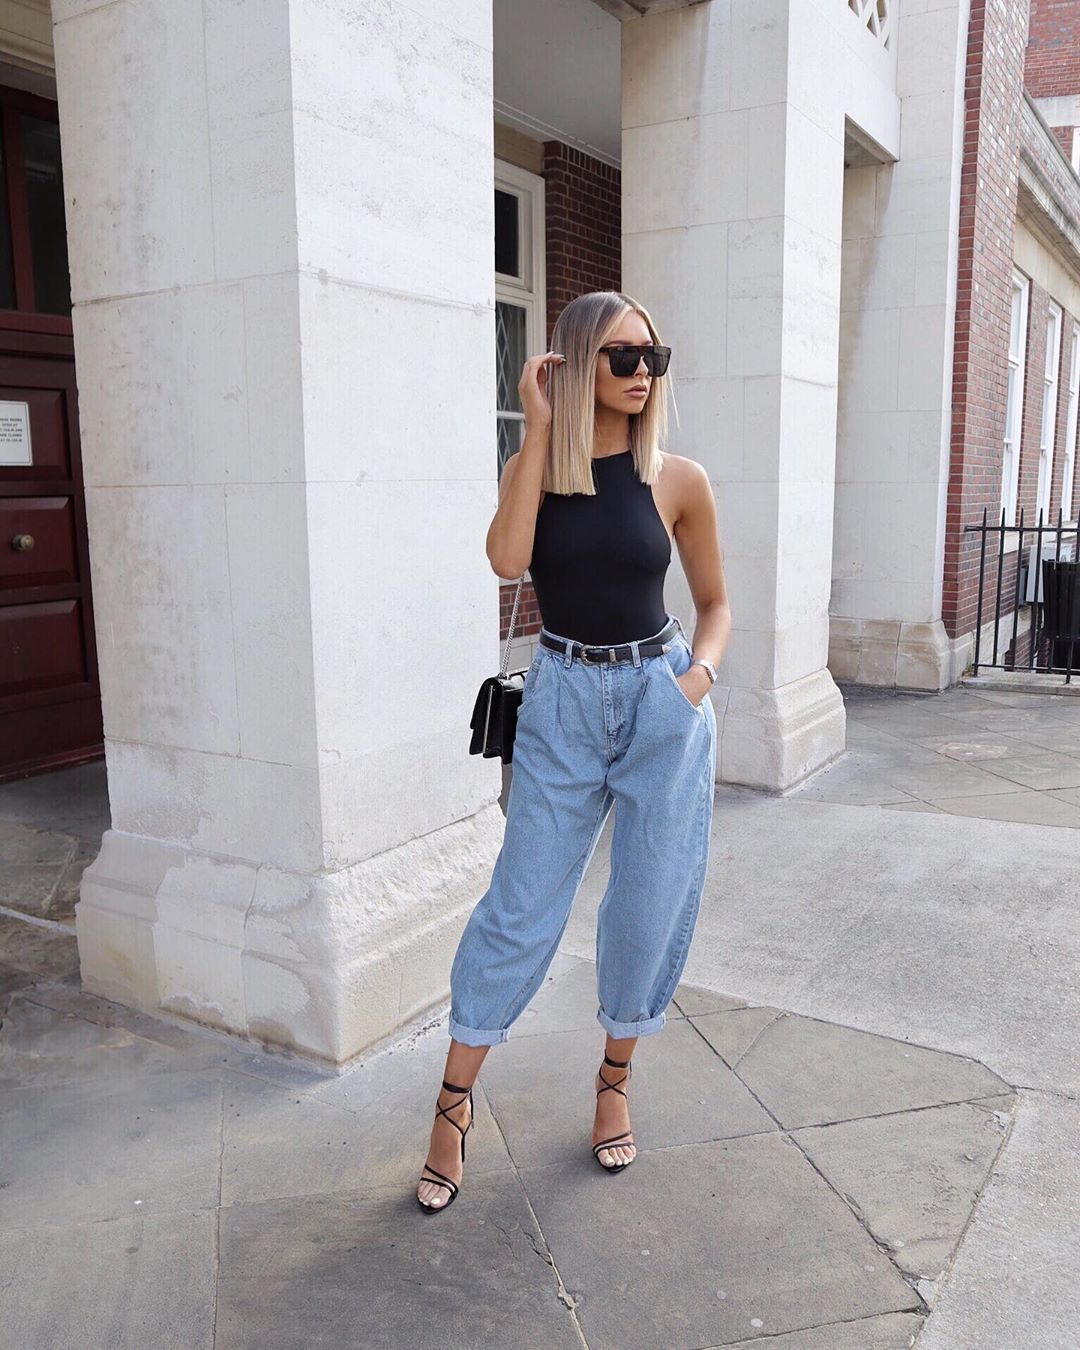 15+ CASUAL STREET STYLE OUTFITS FOR SUMMER YOU WILL DEFINITELY WANT TO COPY. - 15+ CASUAL STREET STYLE OUTFITS FOR SUMMER YOU WILL DEFINITELY WANT TO COPY. -   19 style Summer jeans ideas